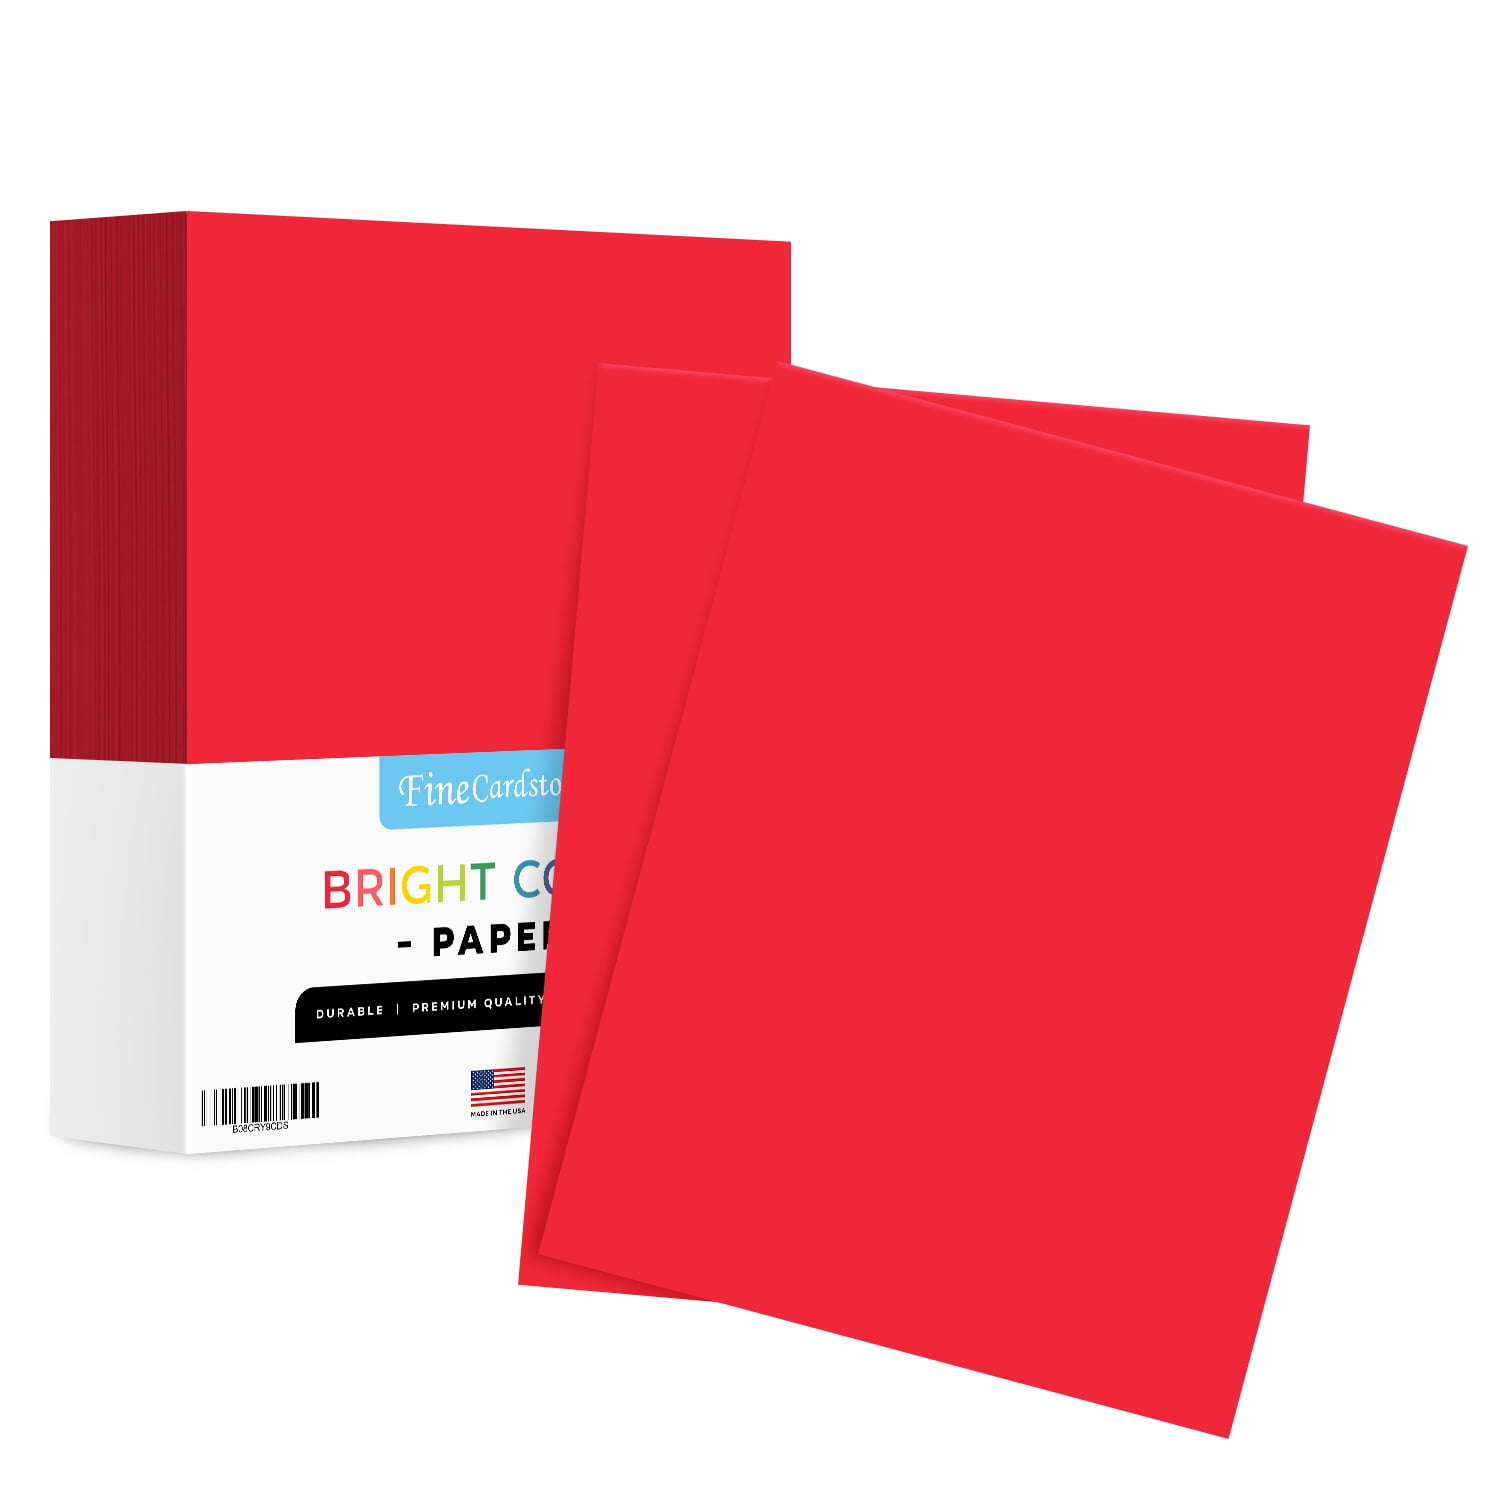 8.5 x 11 Color Paper, 24 lb/89 gsm, 500 Sheets per Pack (Re-Entry Red)